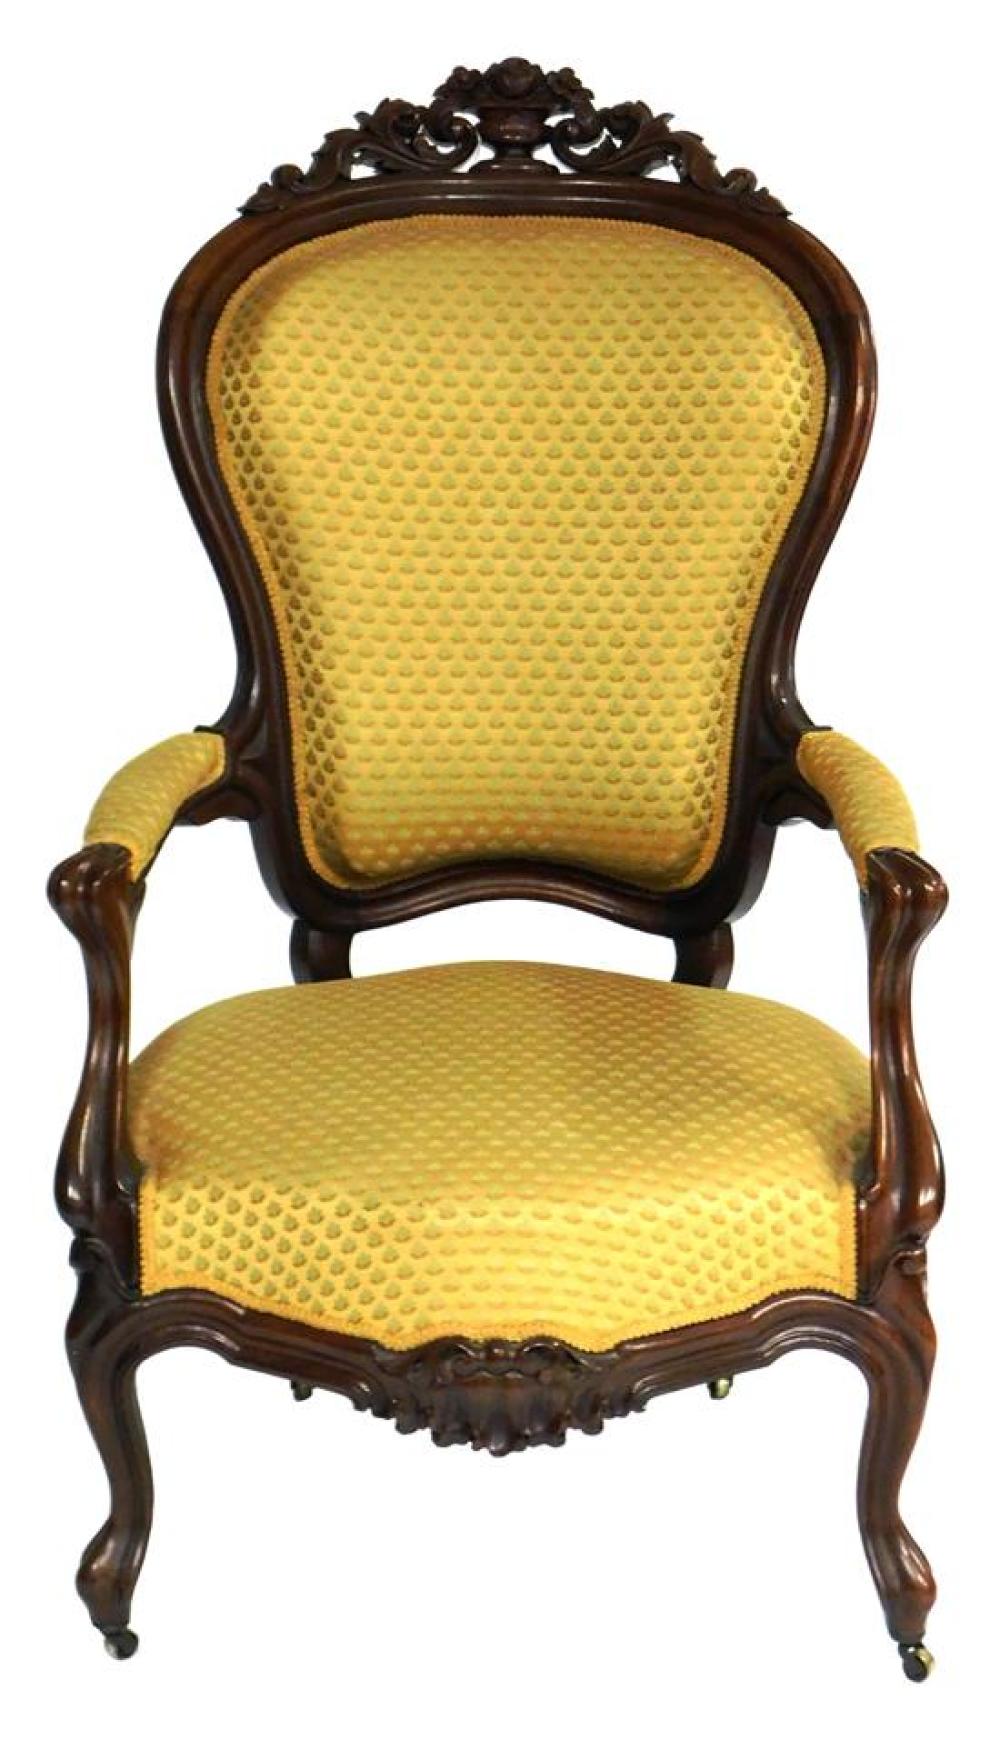 VICTORIAN OPEN ARMCHAIR, LATE 19TH